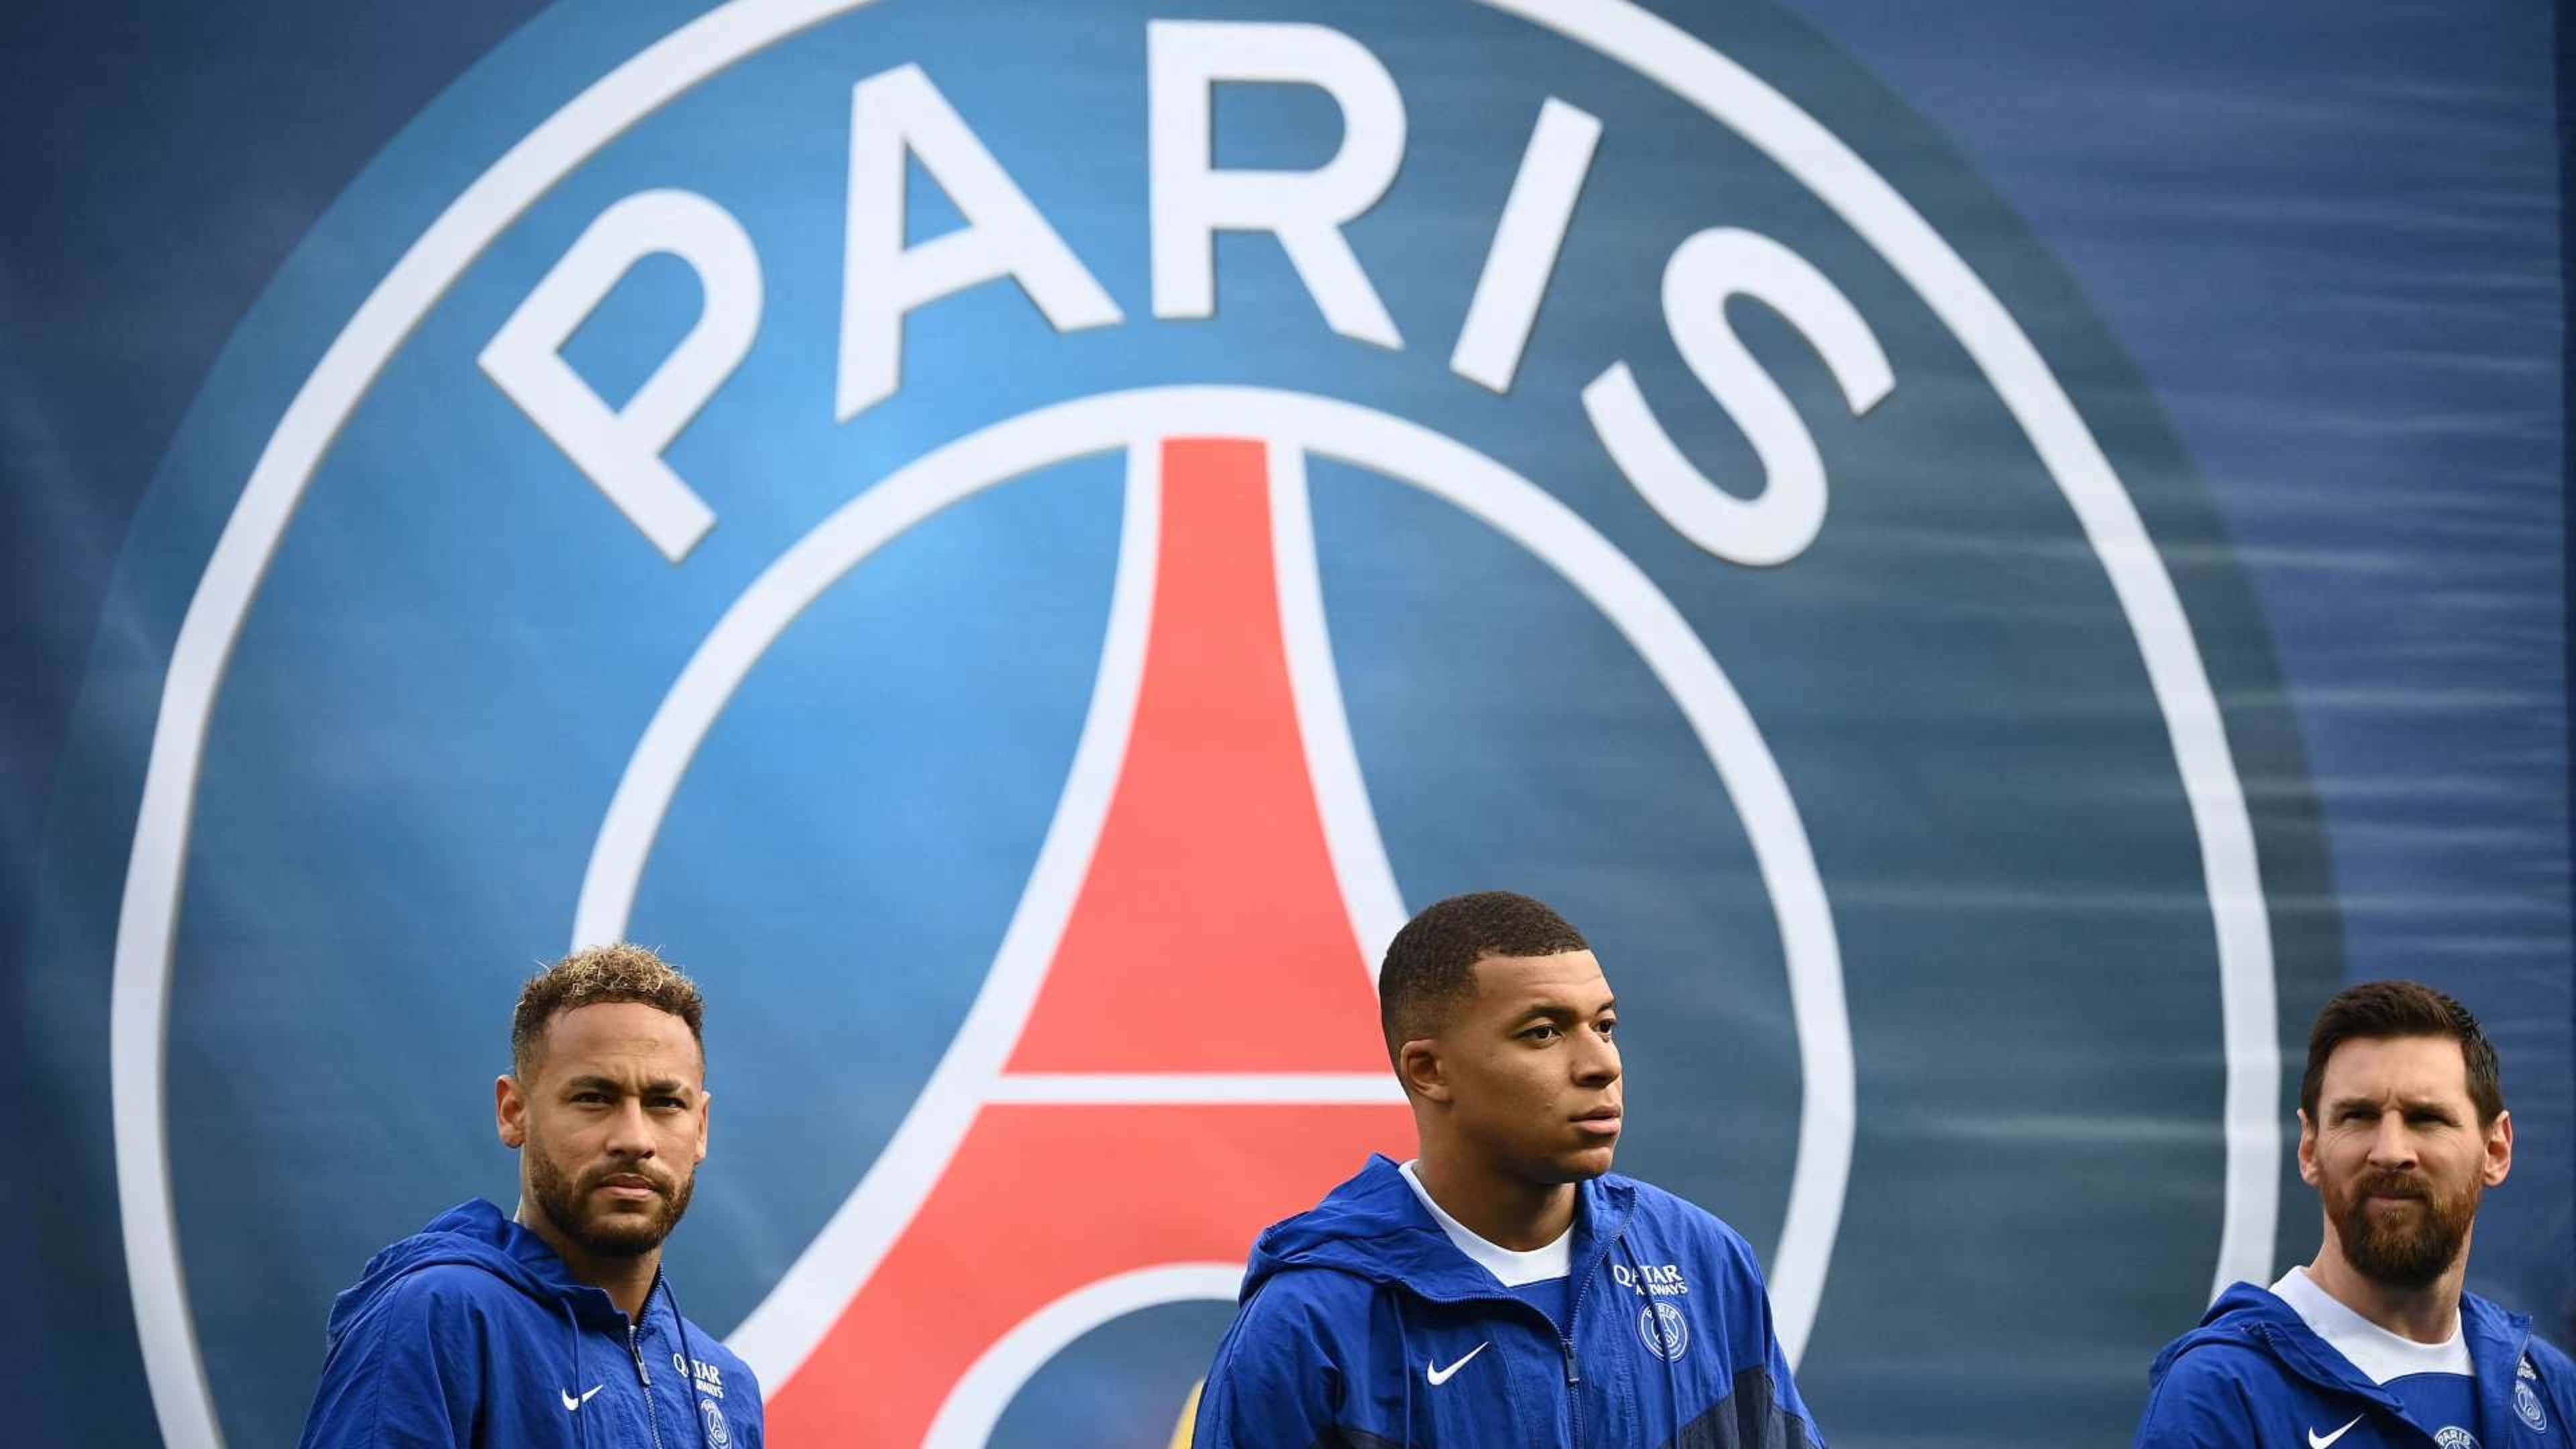 Kylian Mbappé's extraordinary gifts are being wasted at Paris